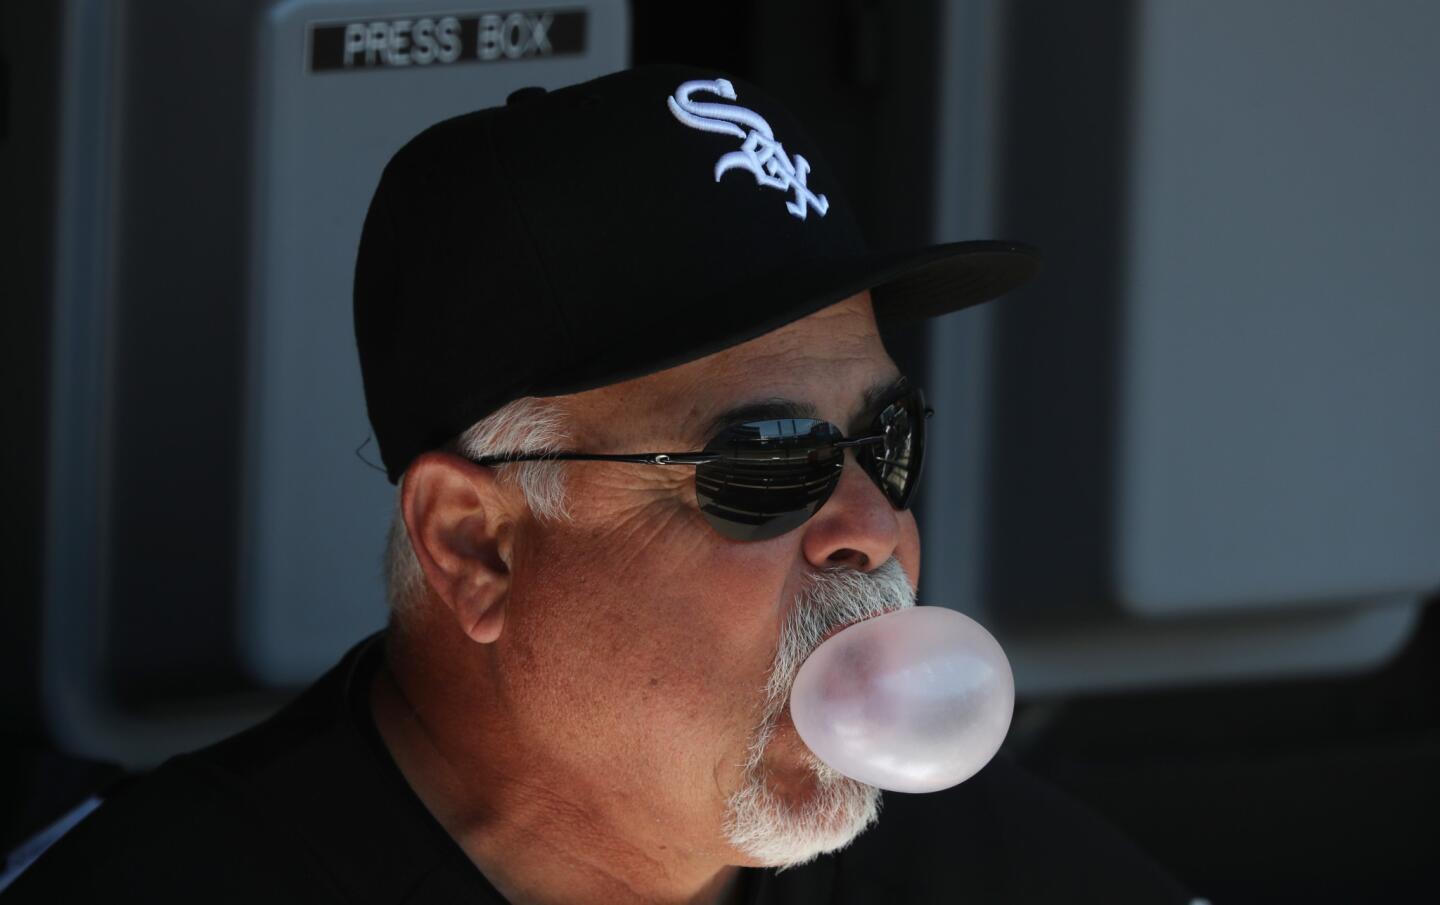 White Sox manager Rick Renteria blows a bubble before a game against the Rays at Guaranteed Rate Field on Tuesday, April 9, 2019.